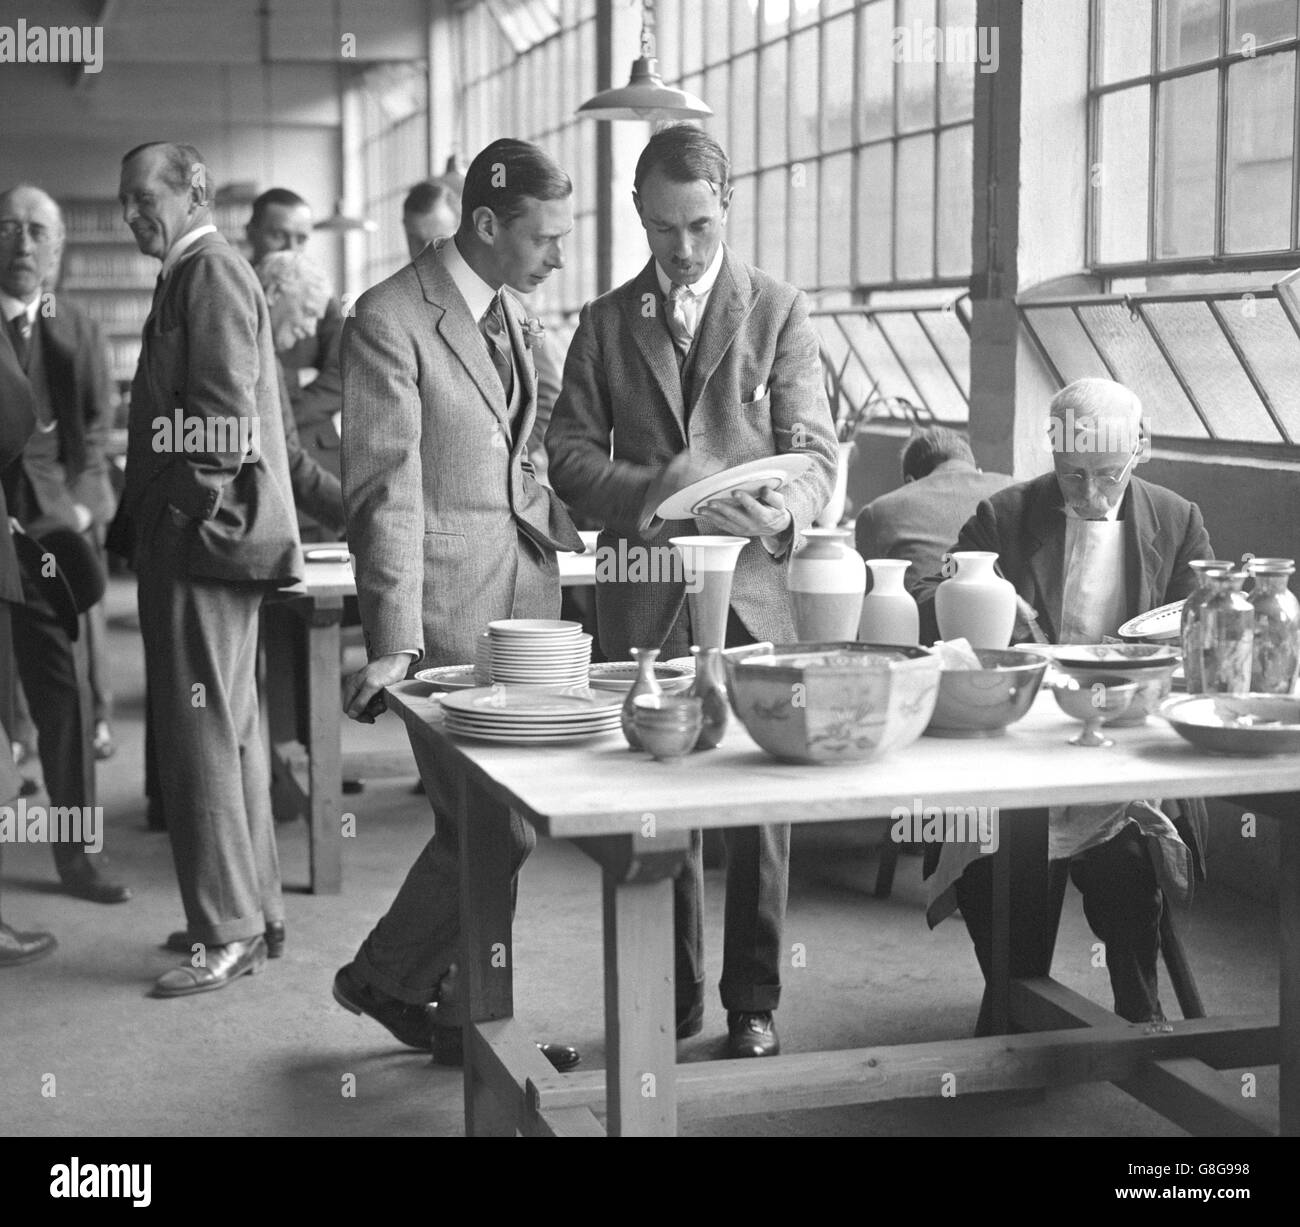 The Duke of York inspects some pottery during a visit to the Wedgwood company in Stoke-on-Trent. Stock Photo